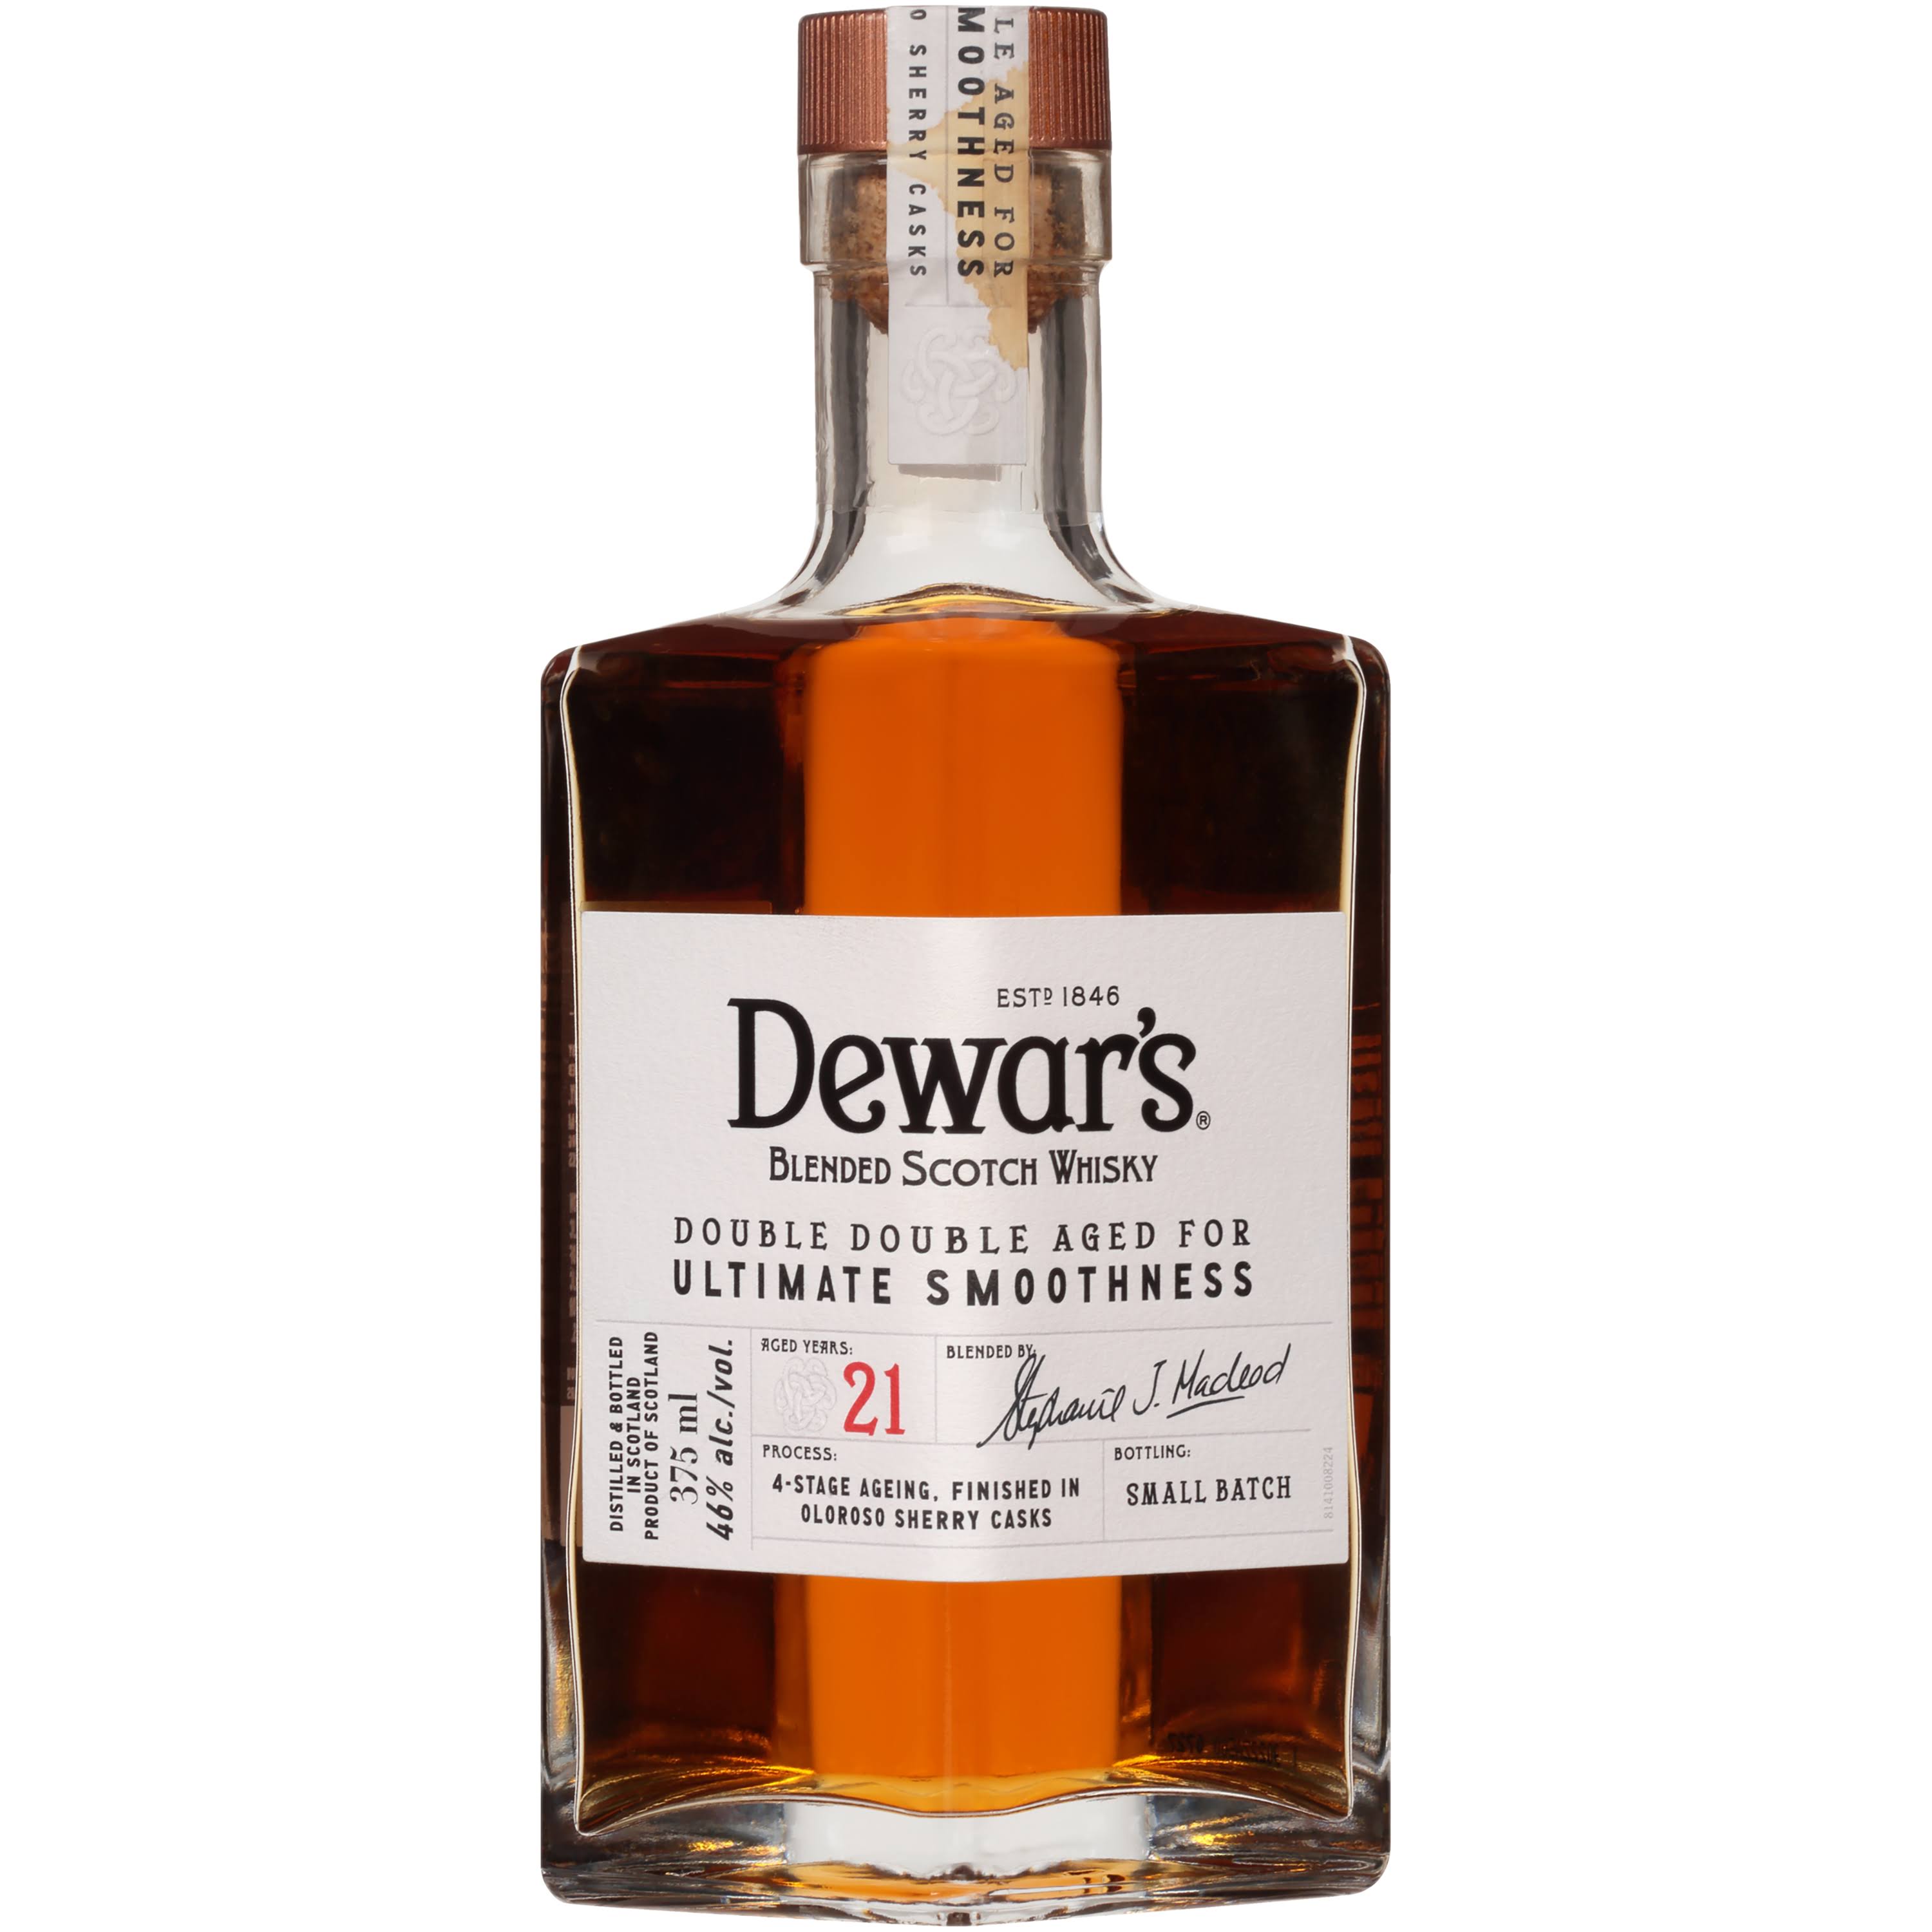 Dewar's Double Double Aged 21 Year Blended Scotch Whisky (375ml)